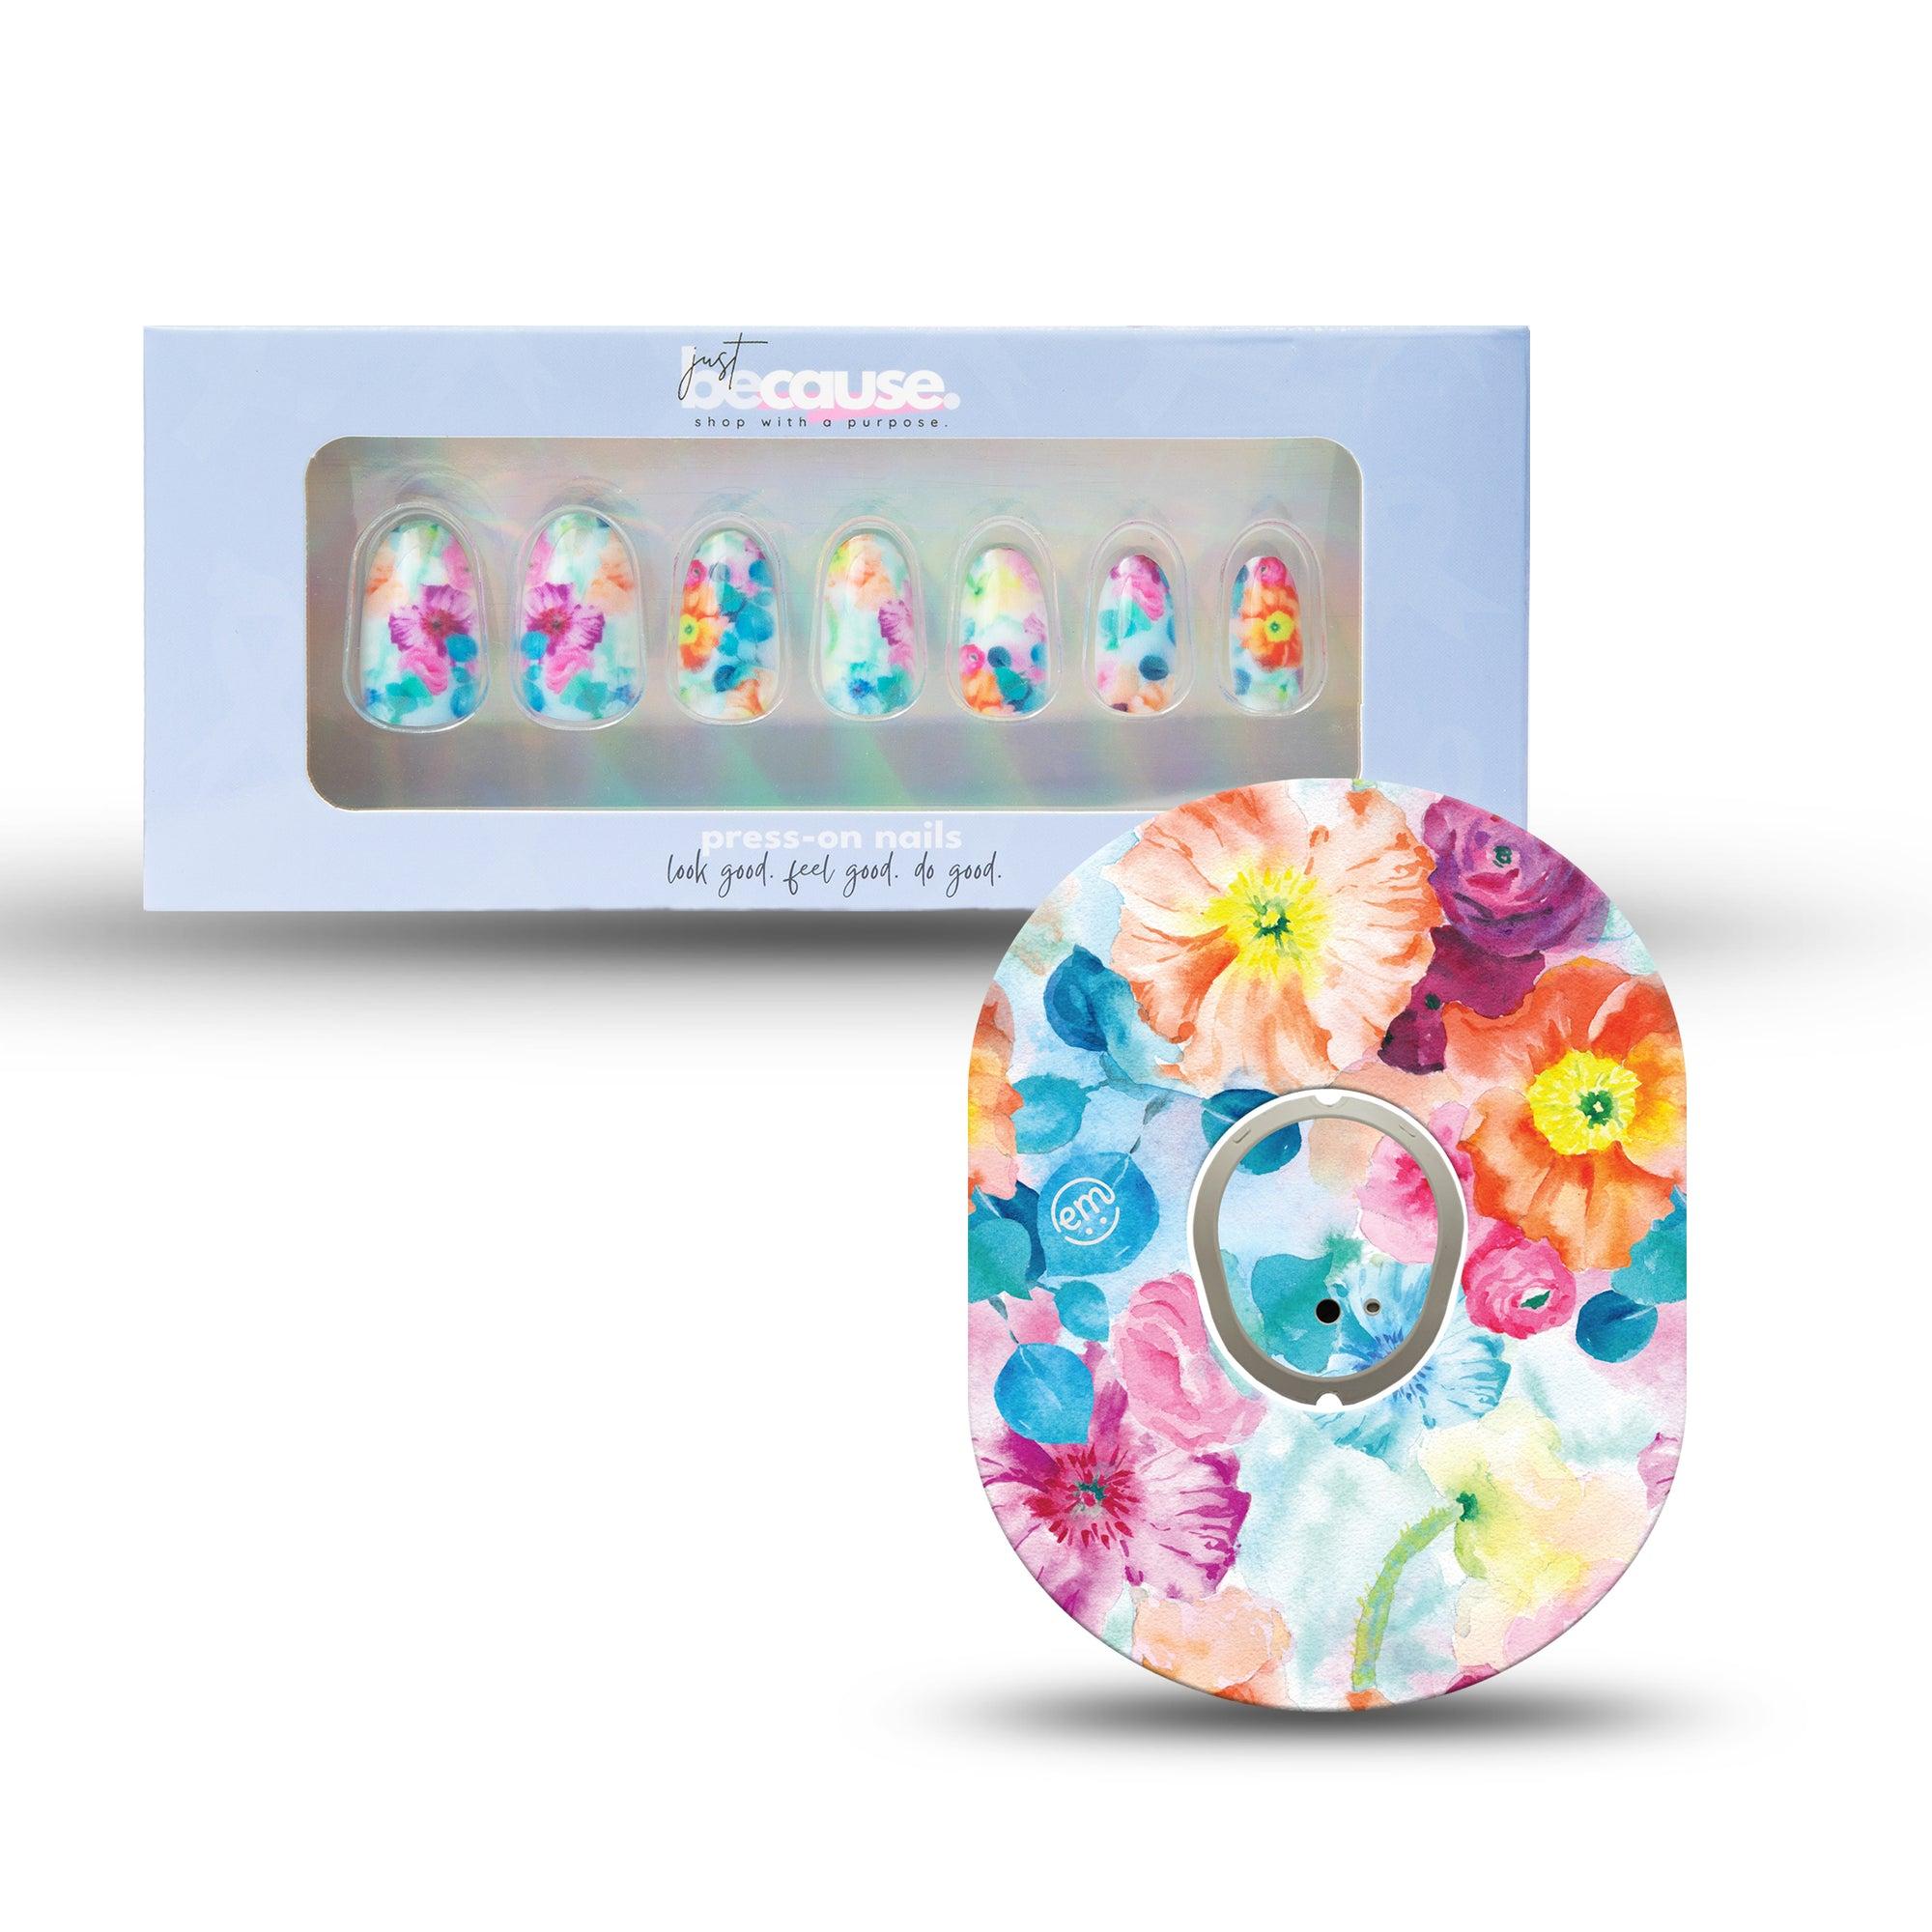 Just BeCause 24 Pcs ABS Press on nails Medium, blue and orange poppies Fake Nails set with matching Watercolor Poppies Dexcom G7 Fixing Ring and Center Sticker, Support T1D - ExpressionMed.com	